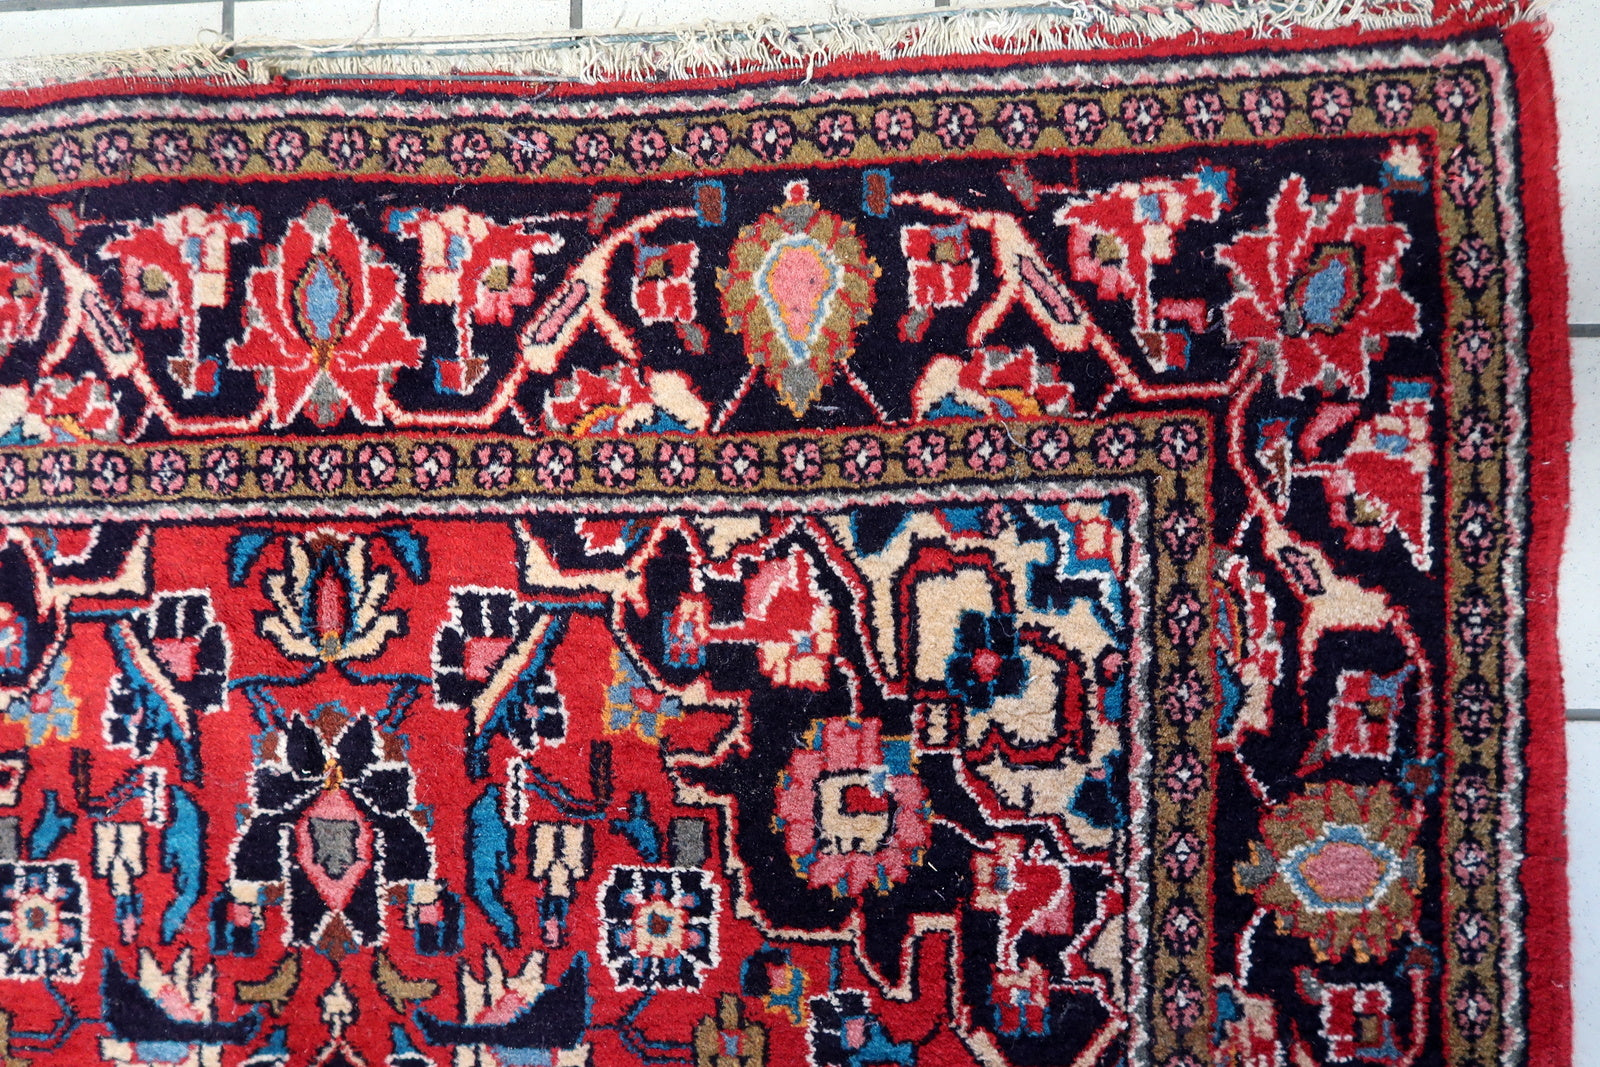 Overhead shot of the Persian Kashan rug displaying its detailed center geometric shapes